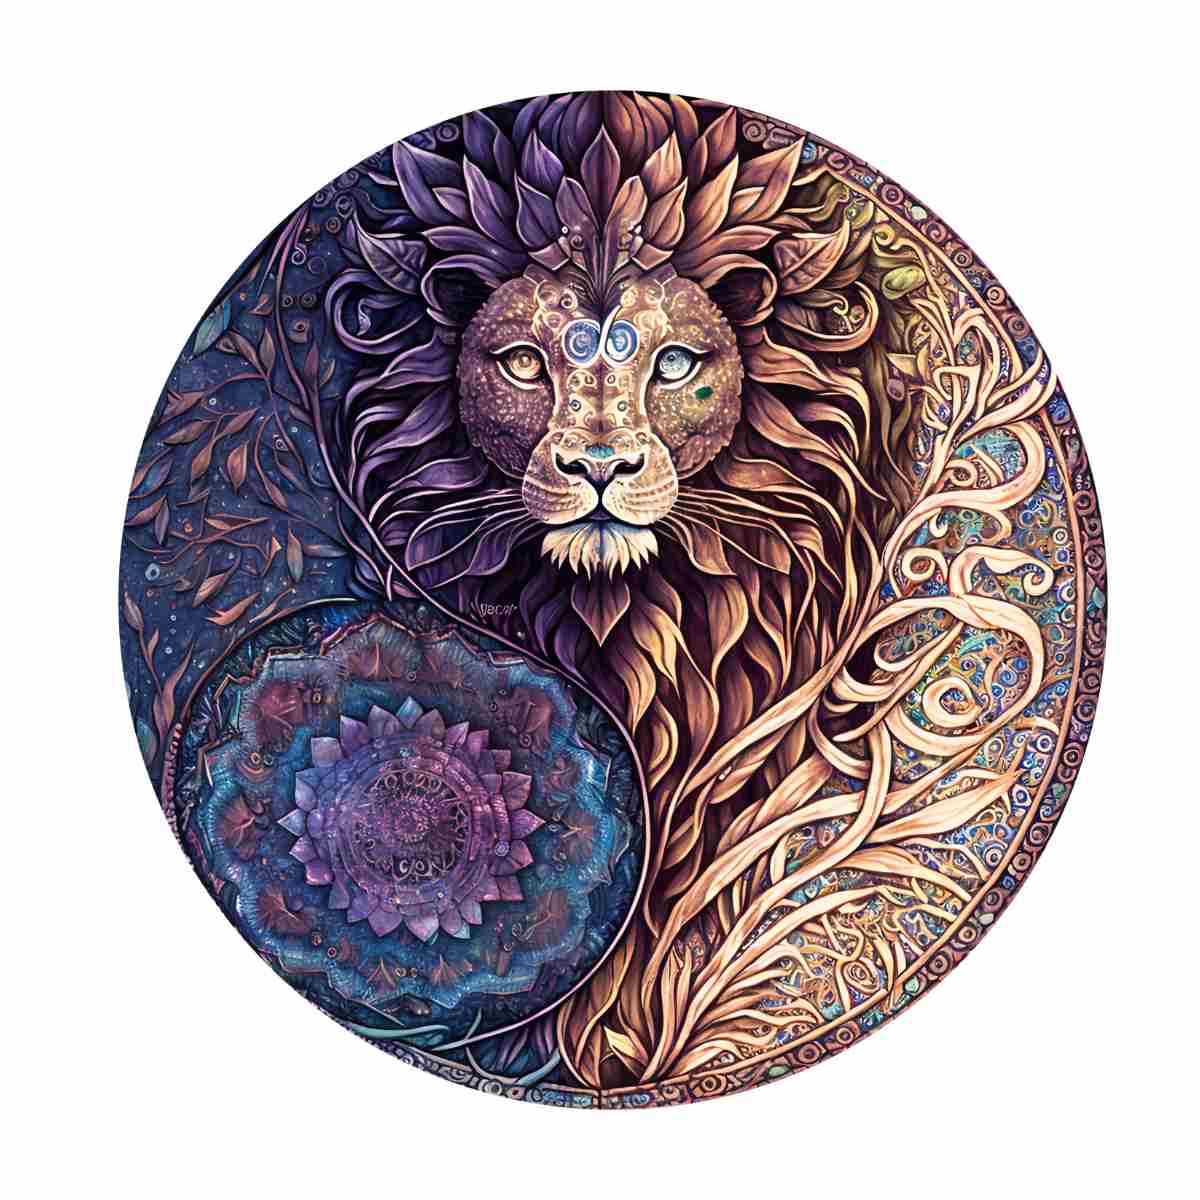 Animal Jigsaw Puzzle > Wooden Jigsaw Puzzle > Jigsaw Puzzle A5 Lion Yin Yang- Jigsaw Puzzle